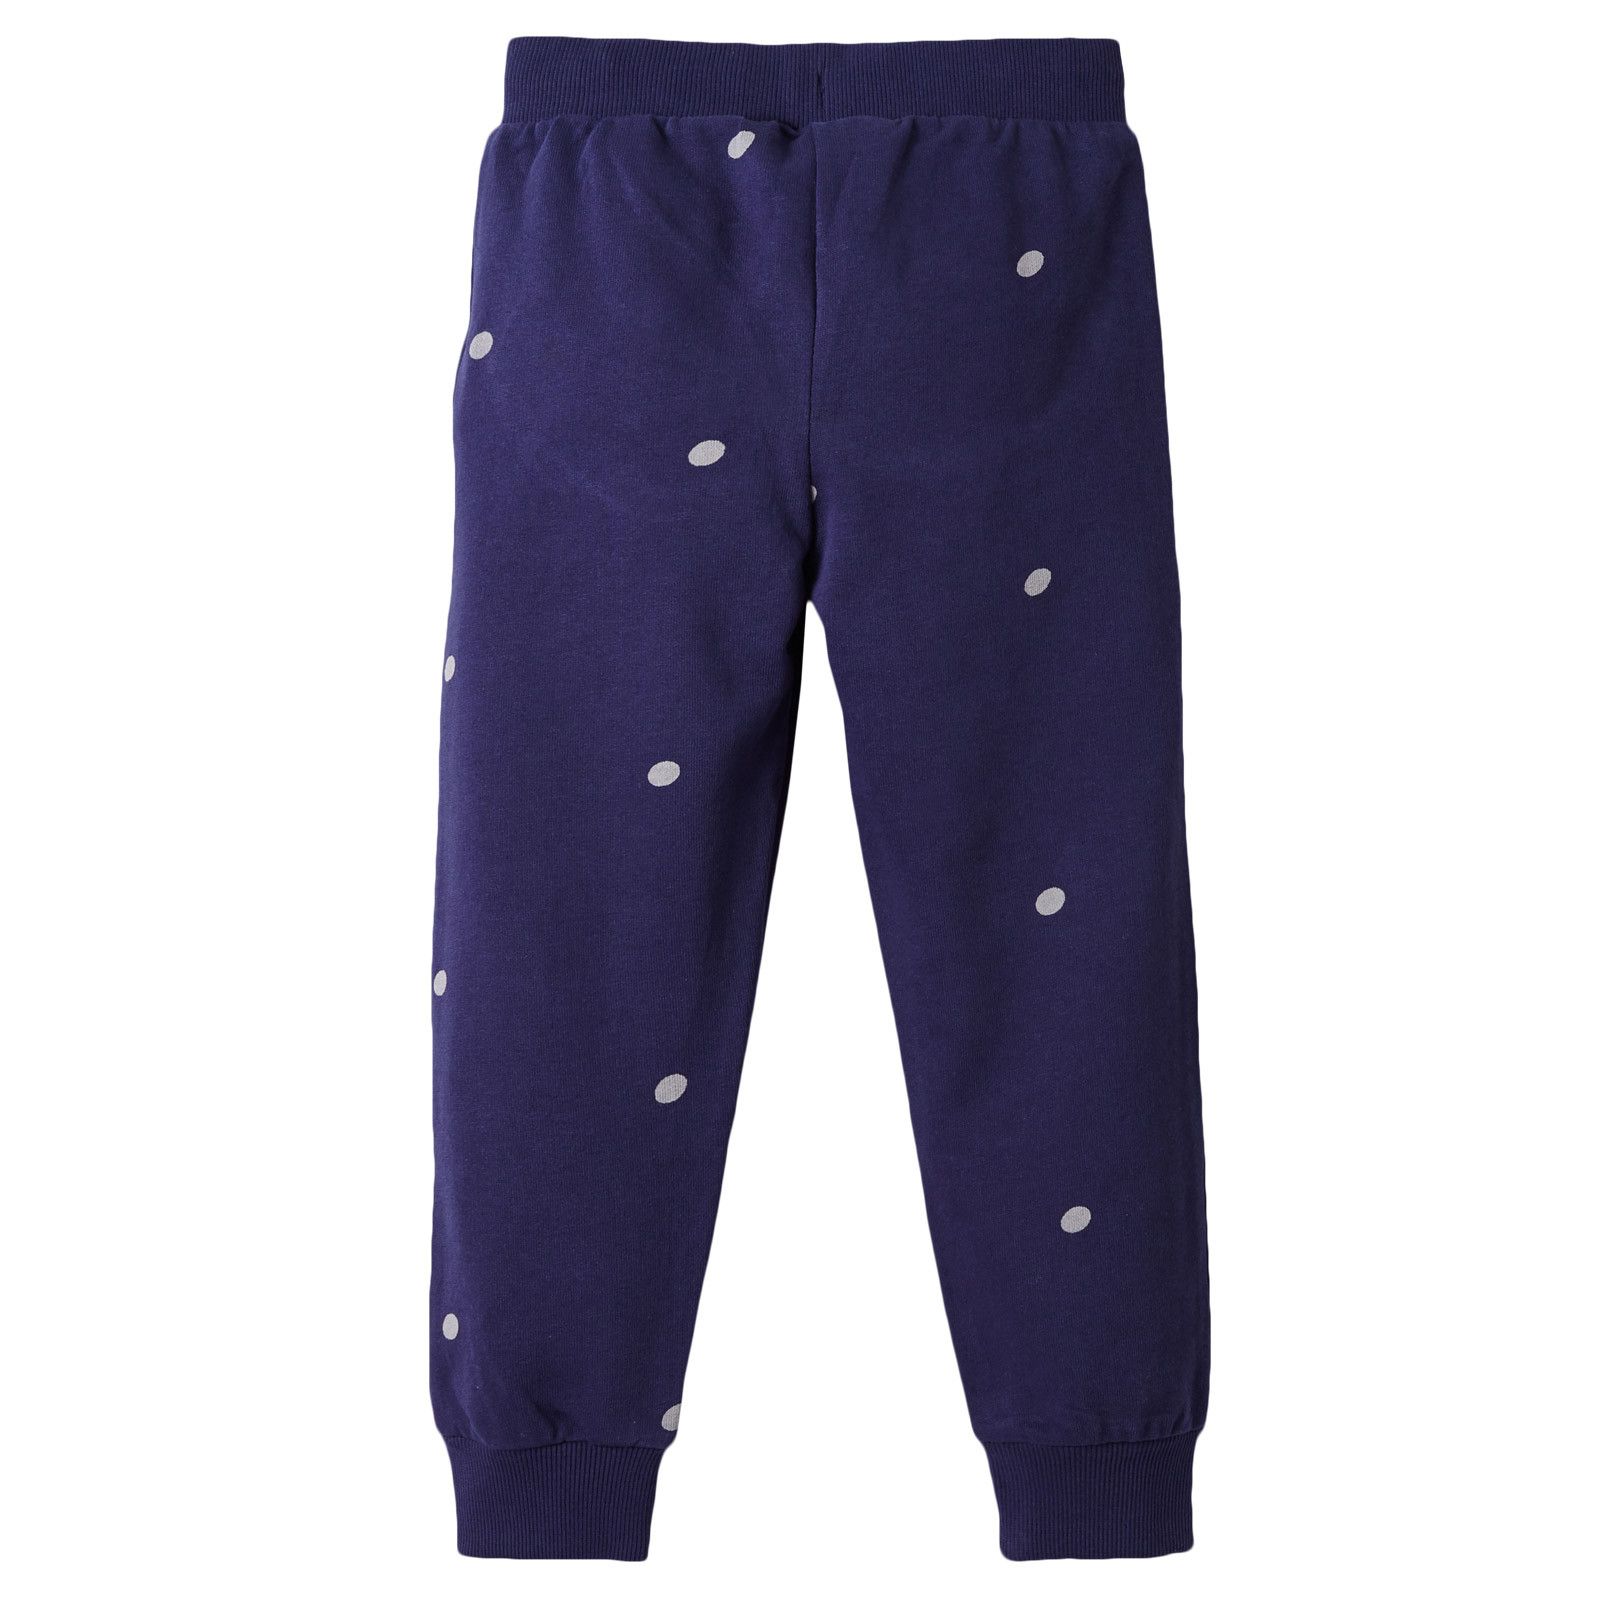 Boys&Girls Navy Blue Trouses With White Speck - CÉMAROSE | Children's Fashion Store - 2